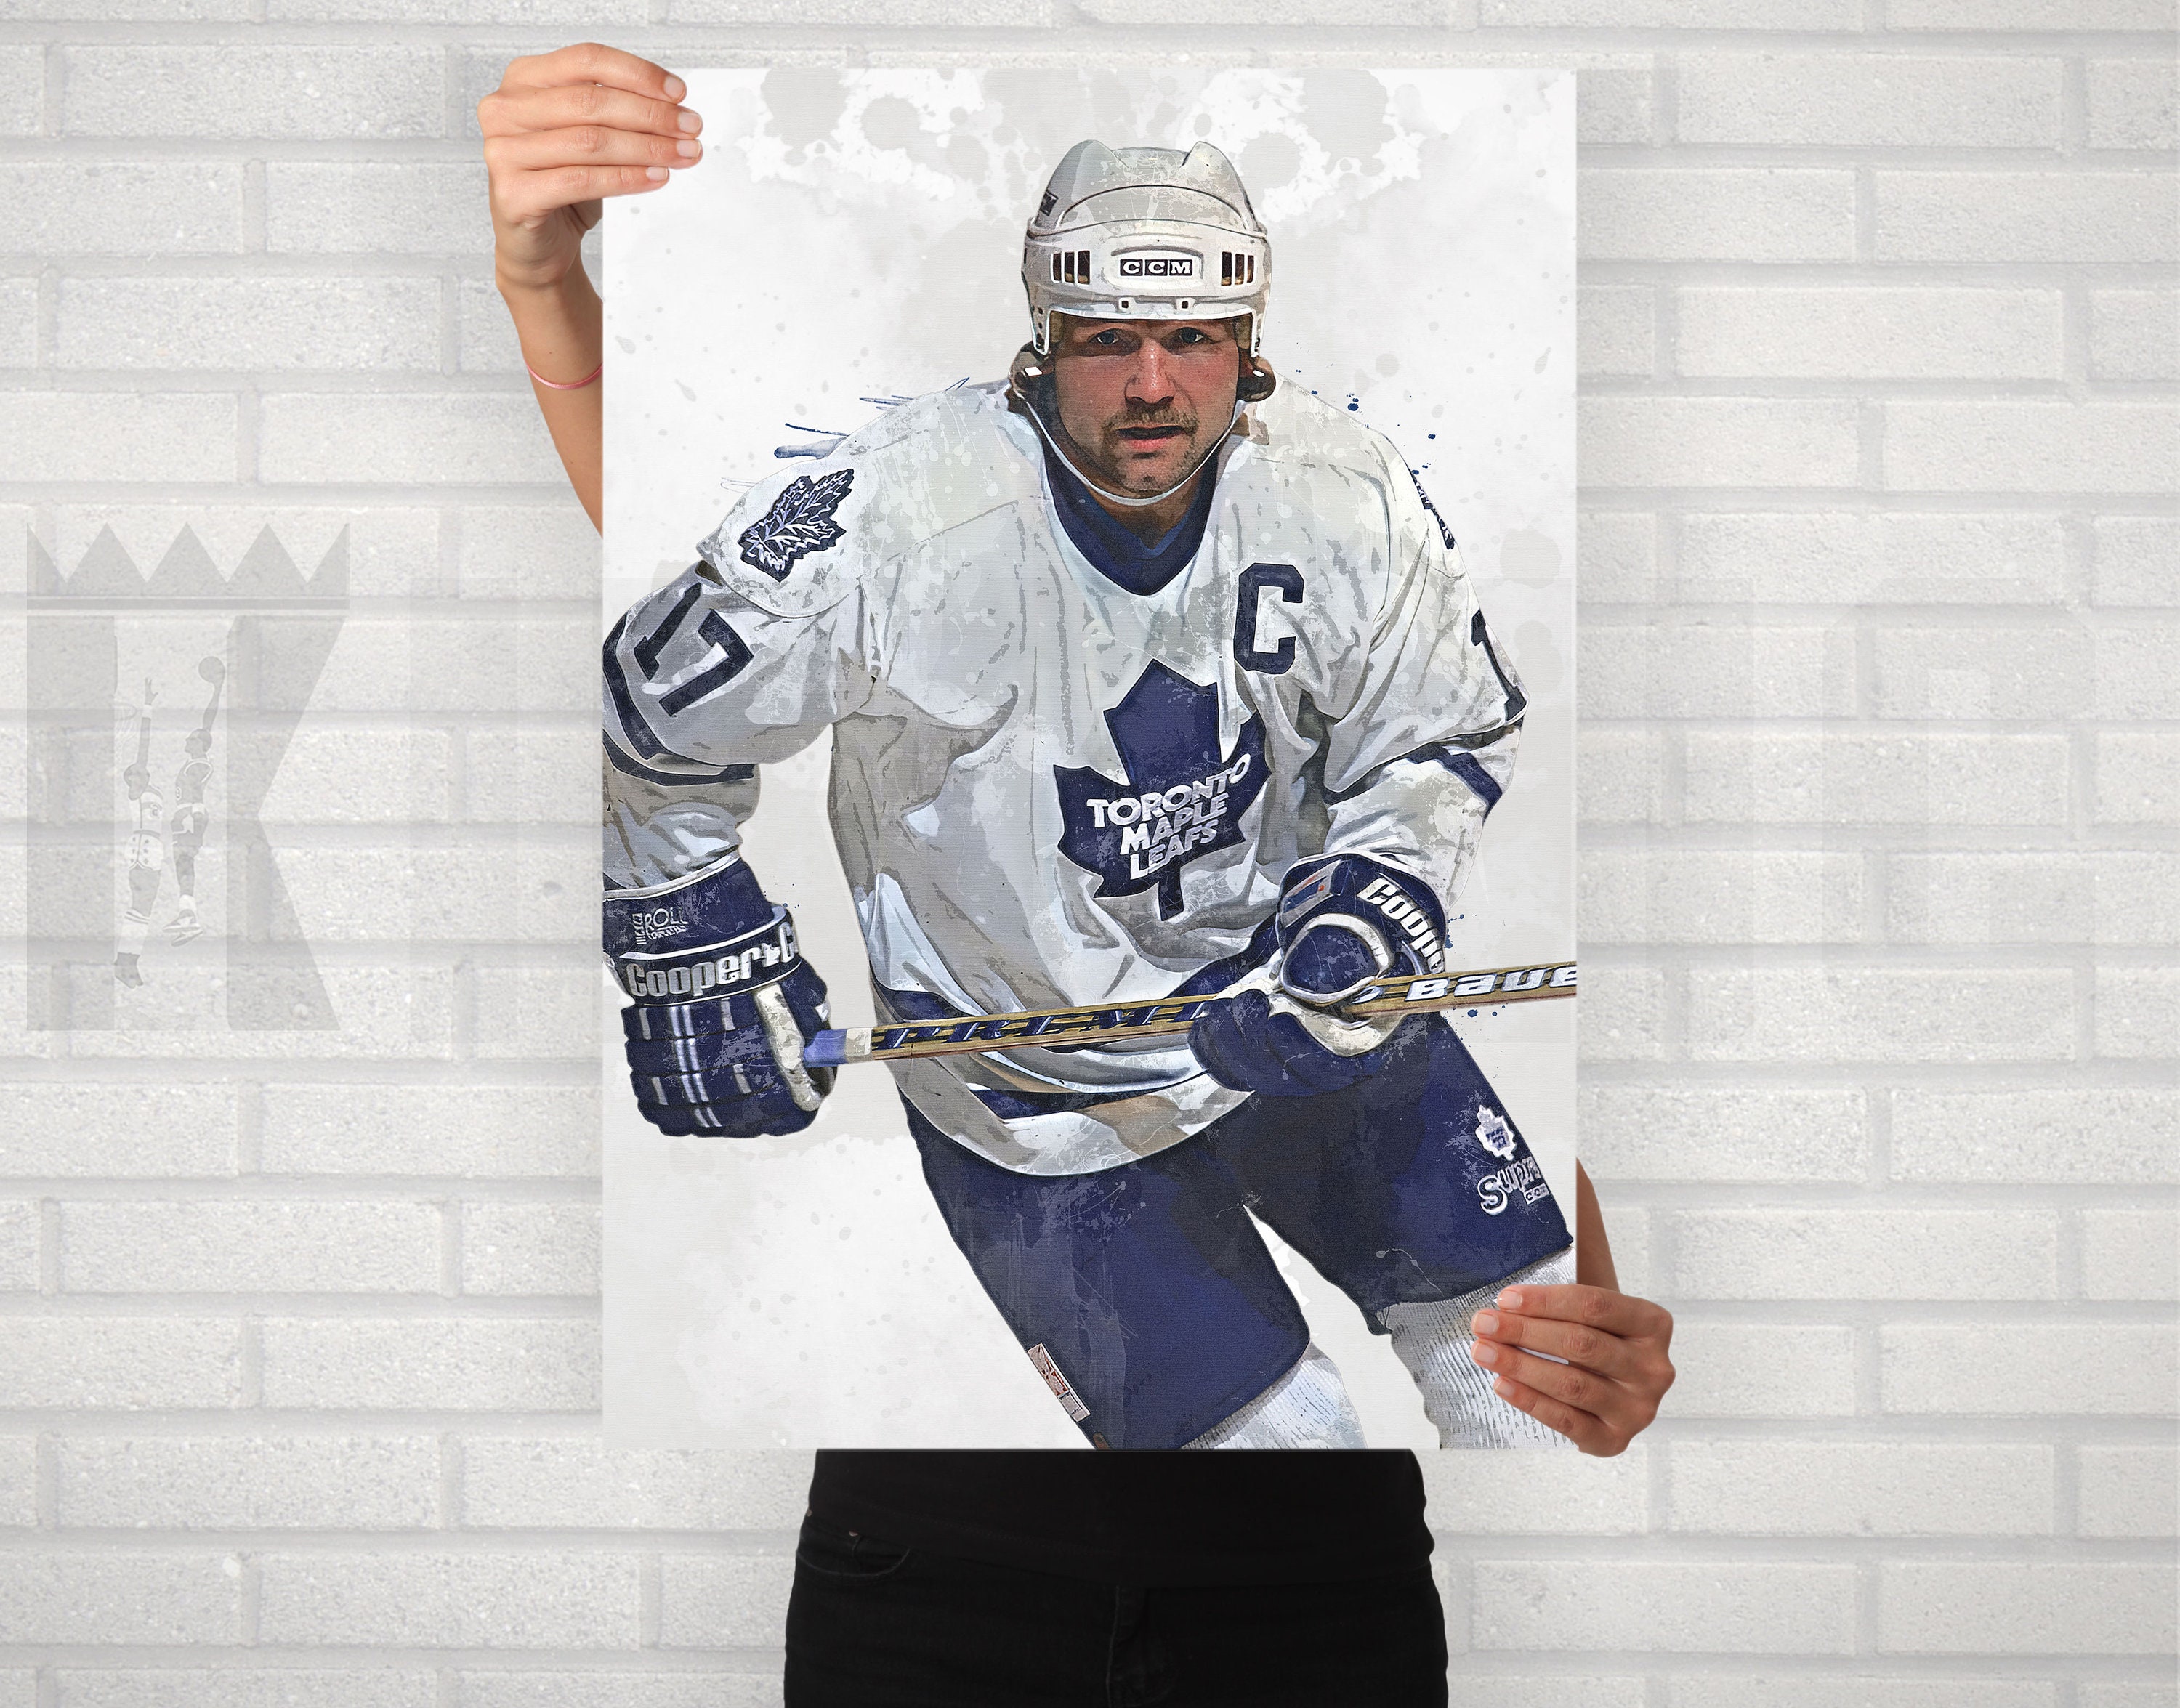 WENDEL CLARK TORONTO MAPLE LEAFS CCM AUTHENTIC ON-ICE GAME NHL HOCKEY  JERSEY.